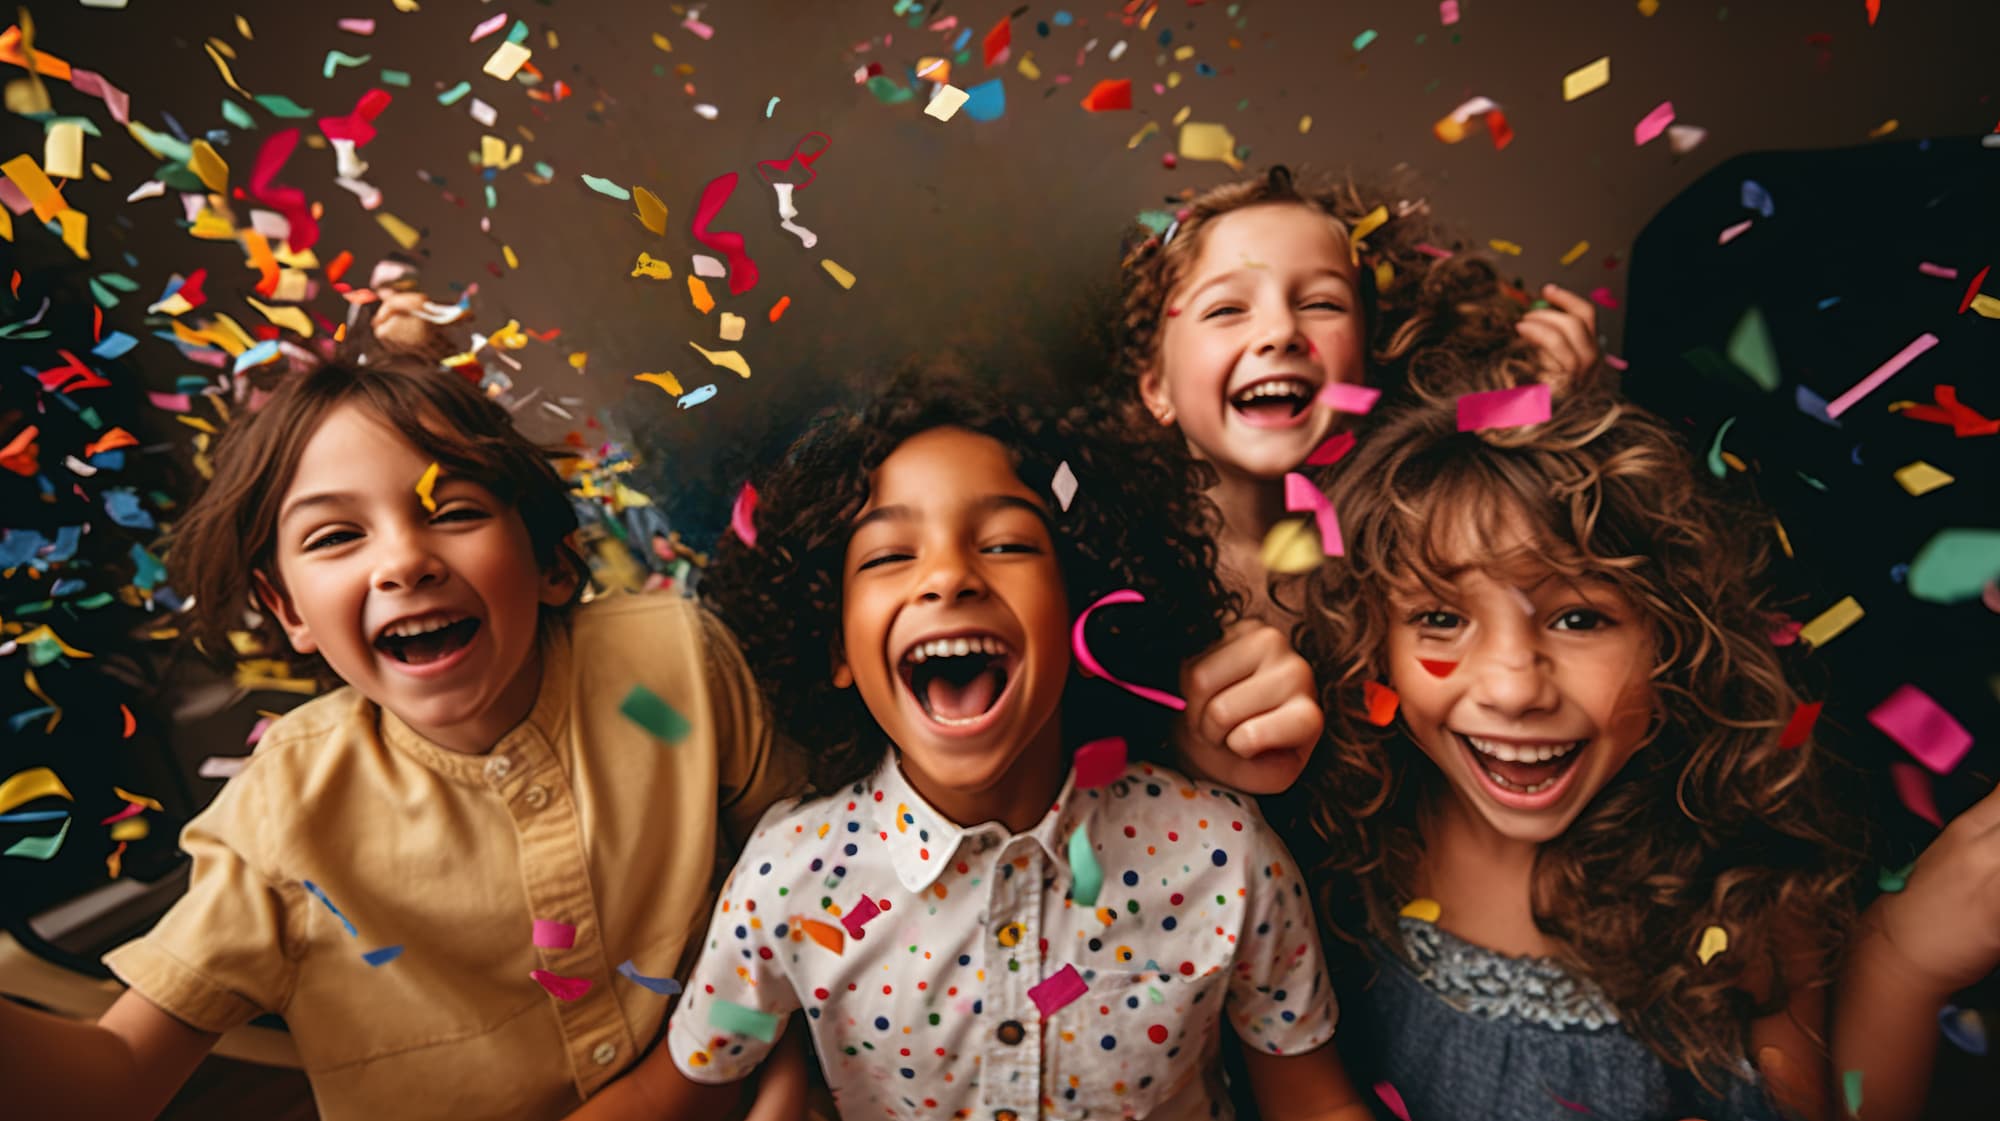 Four children laugh together under a shower of confetti.